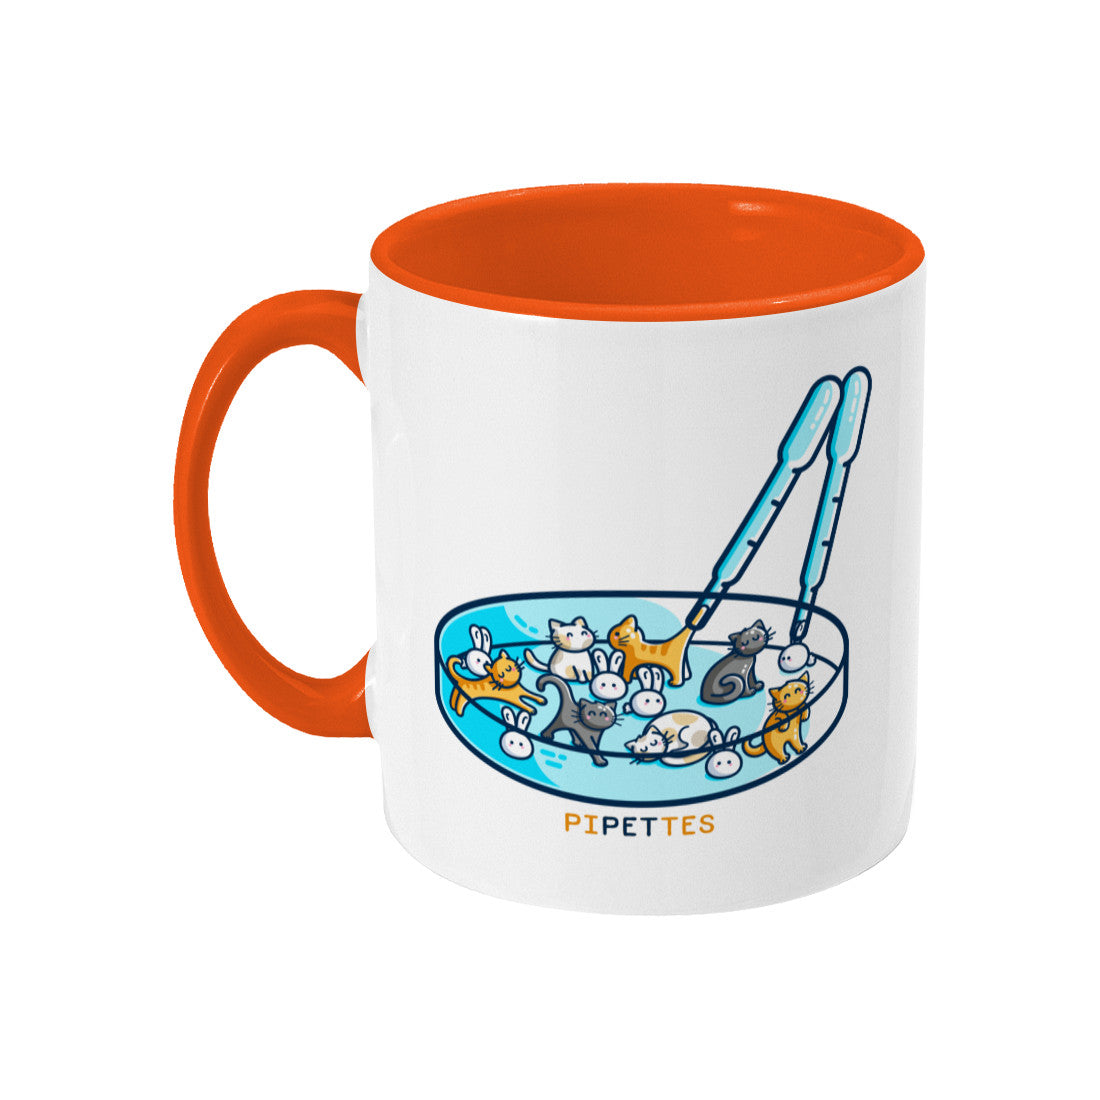 A white mug with an orange coloured handle and inside, handle pointing to the left. Design on the mug is a petri dish or cats and rabbits with two pipettes and the word pipettes beneath.